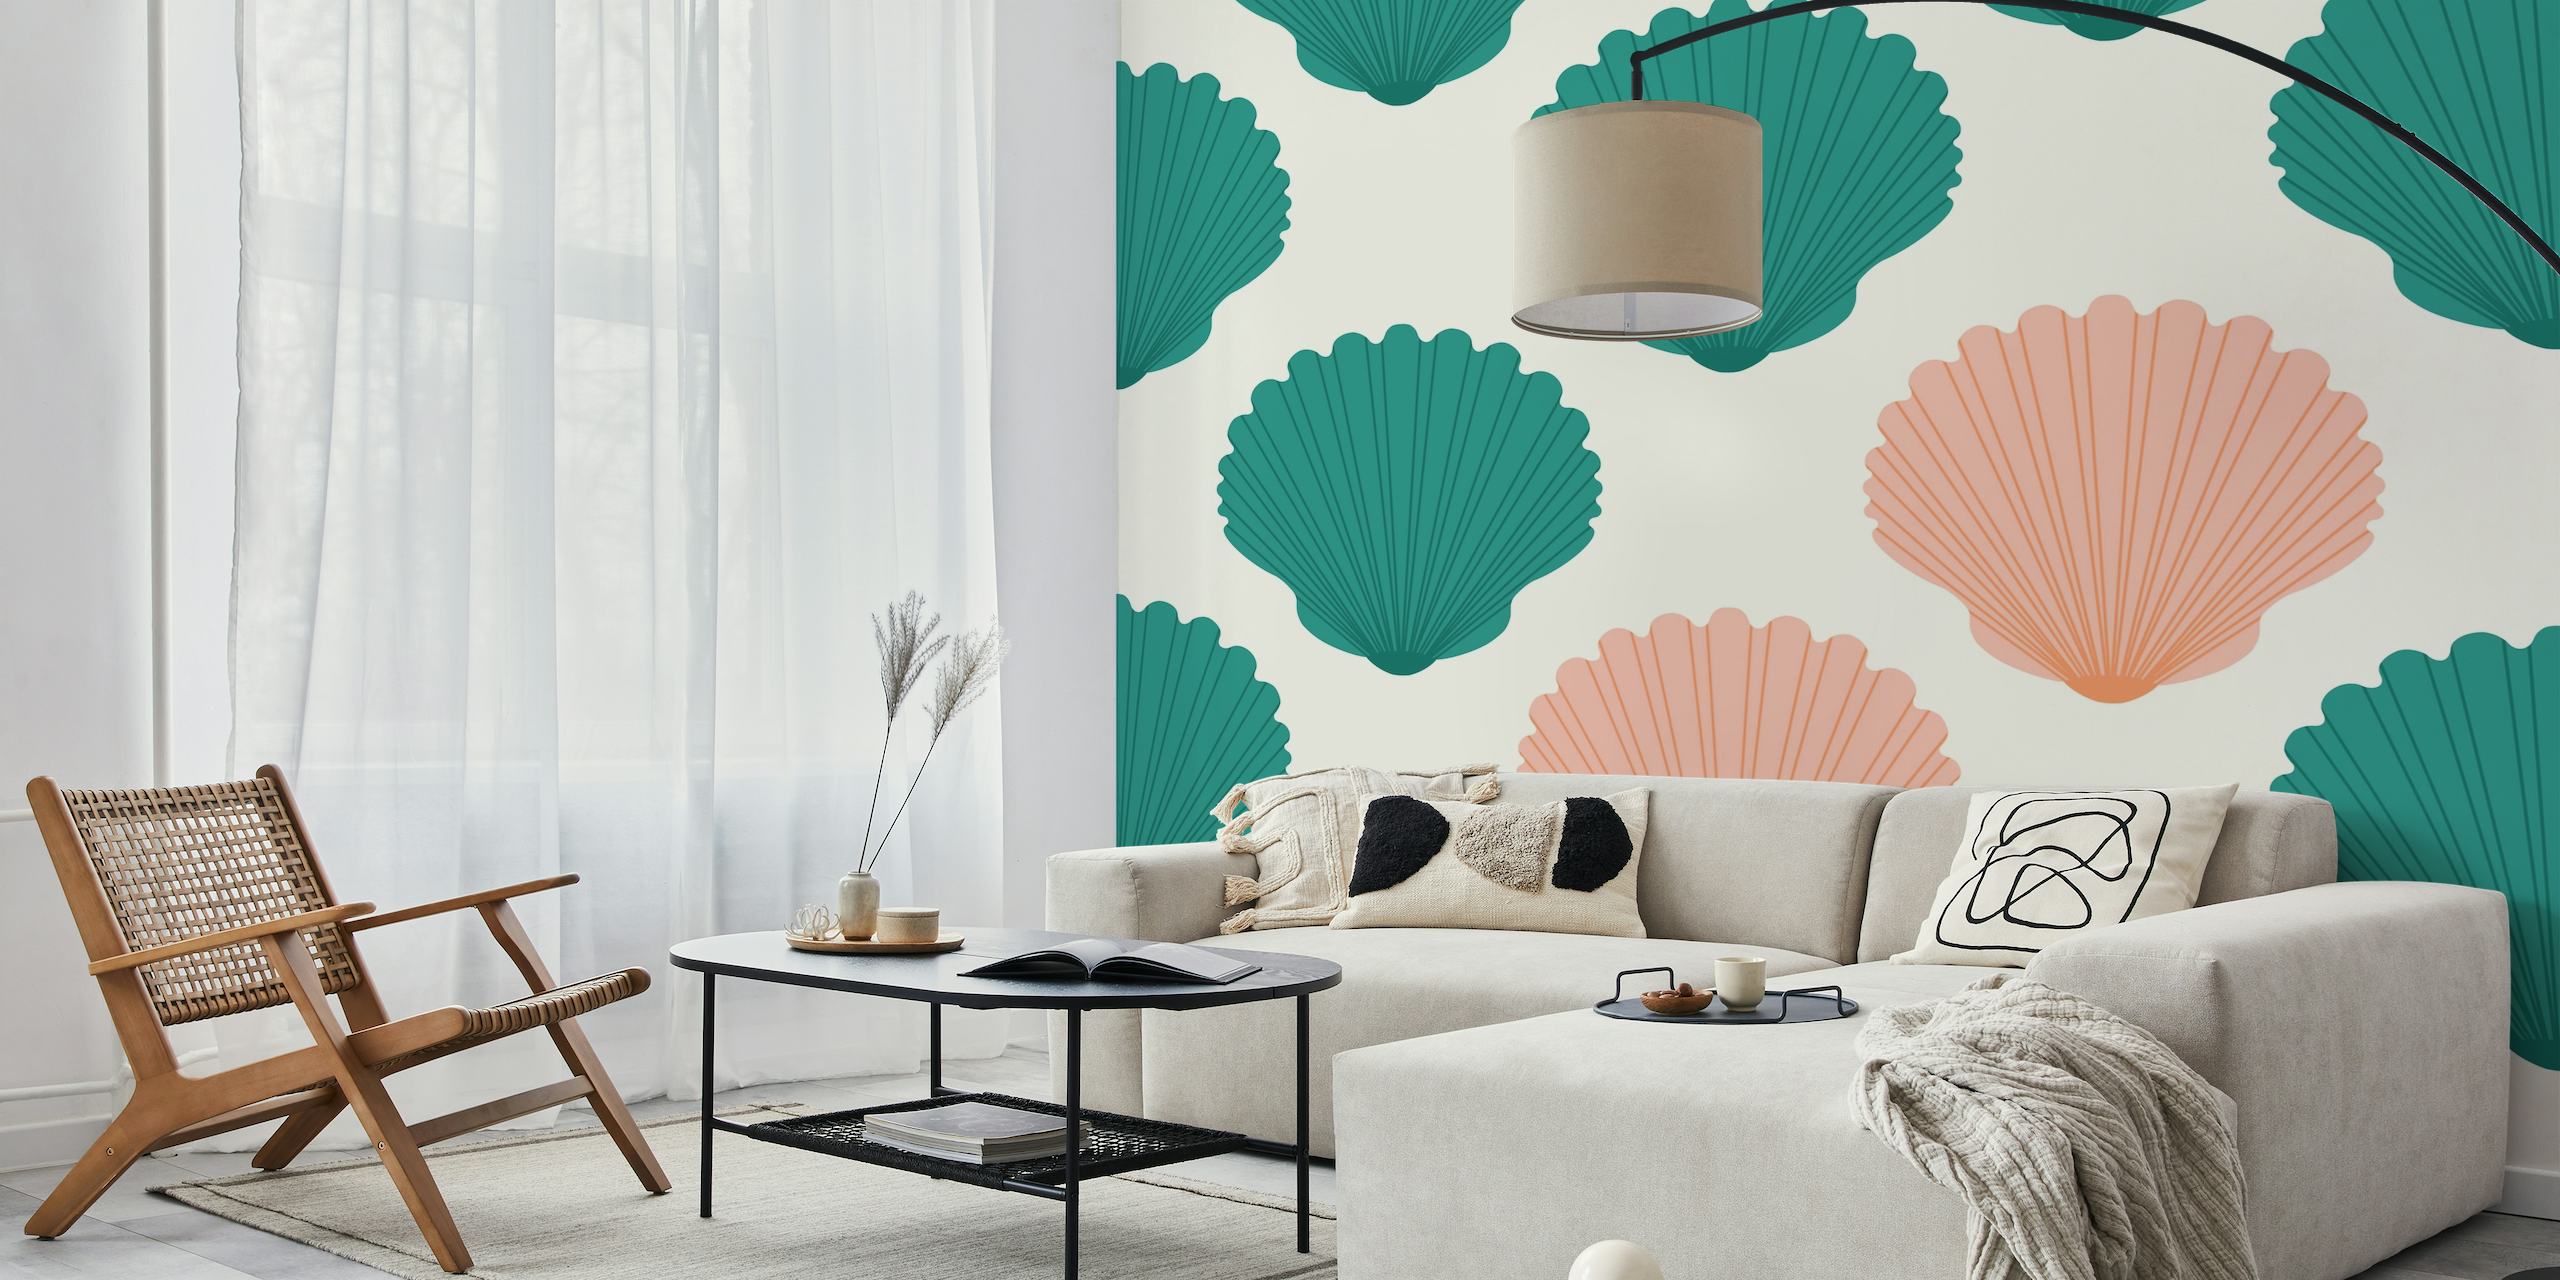 Green and peach stylized shell pattern wall mural